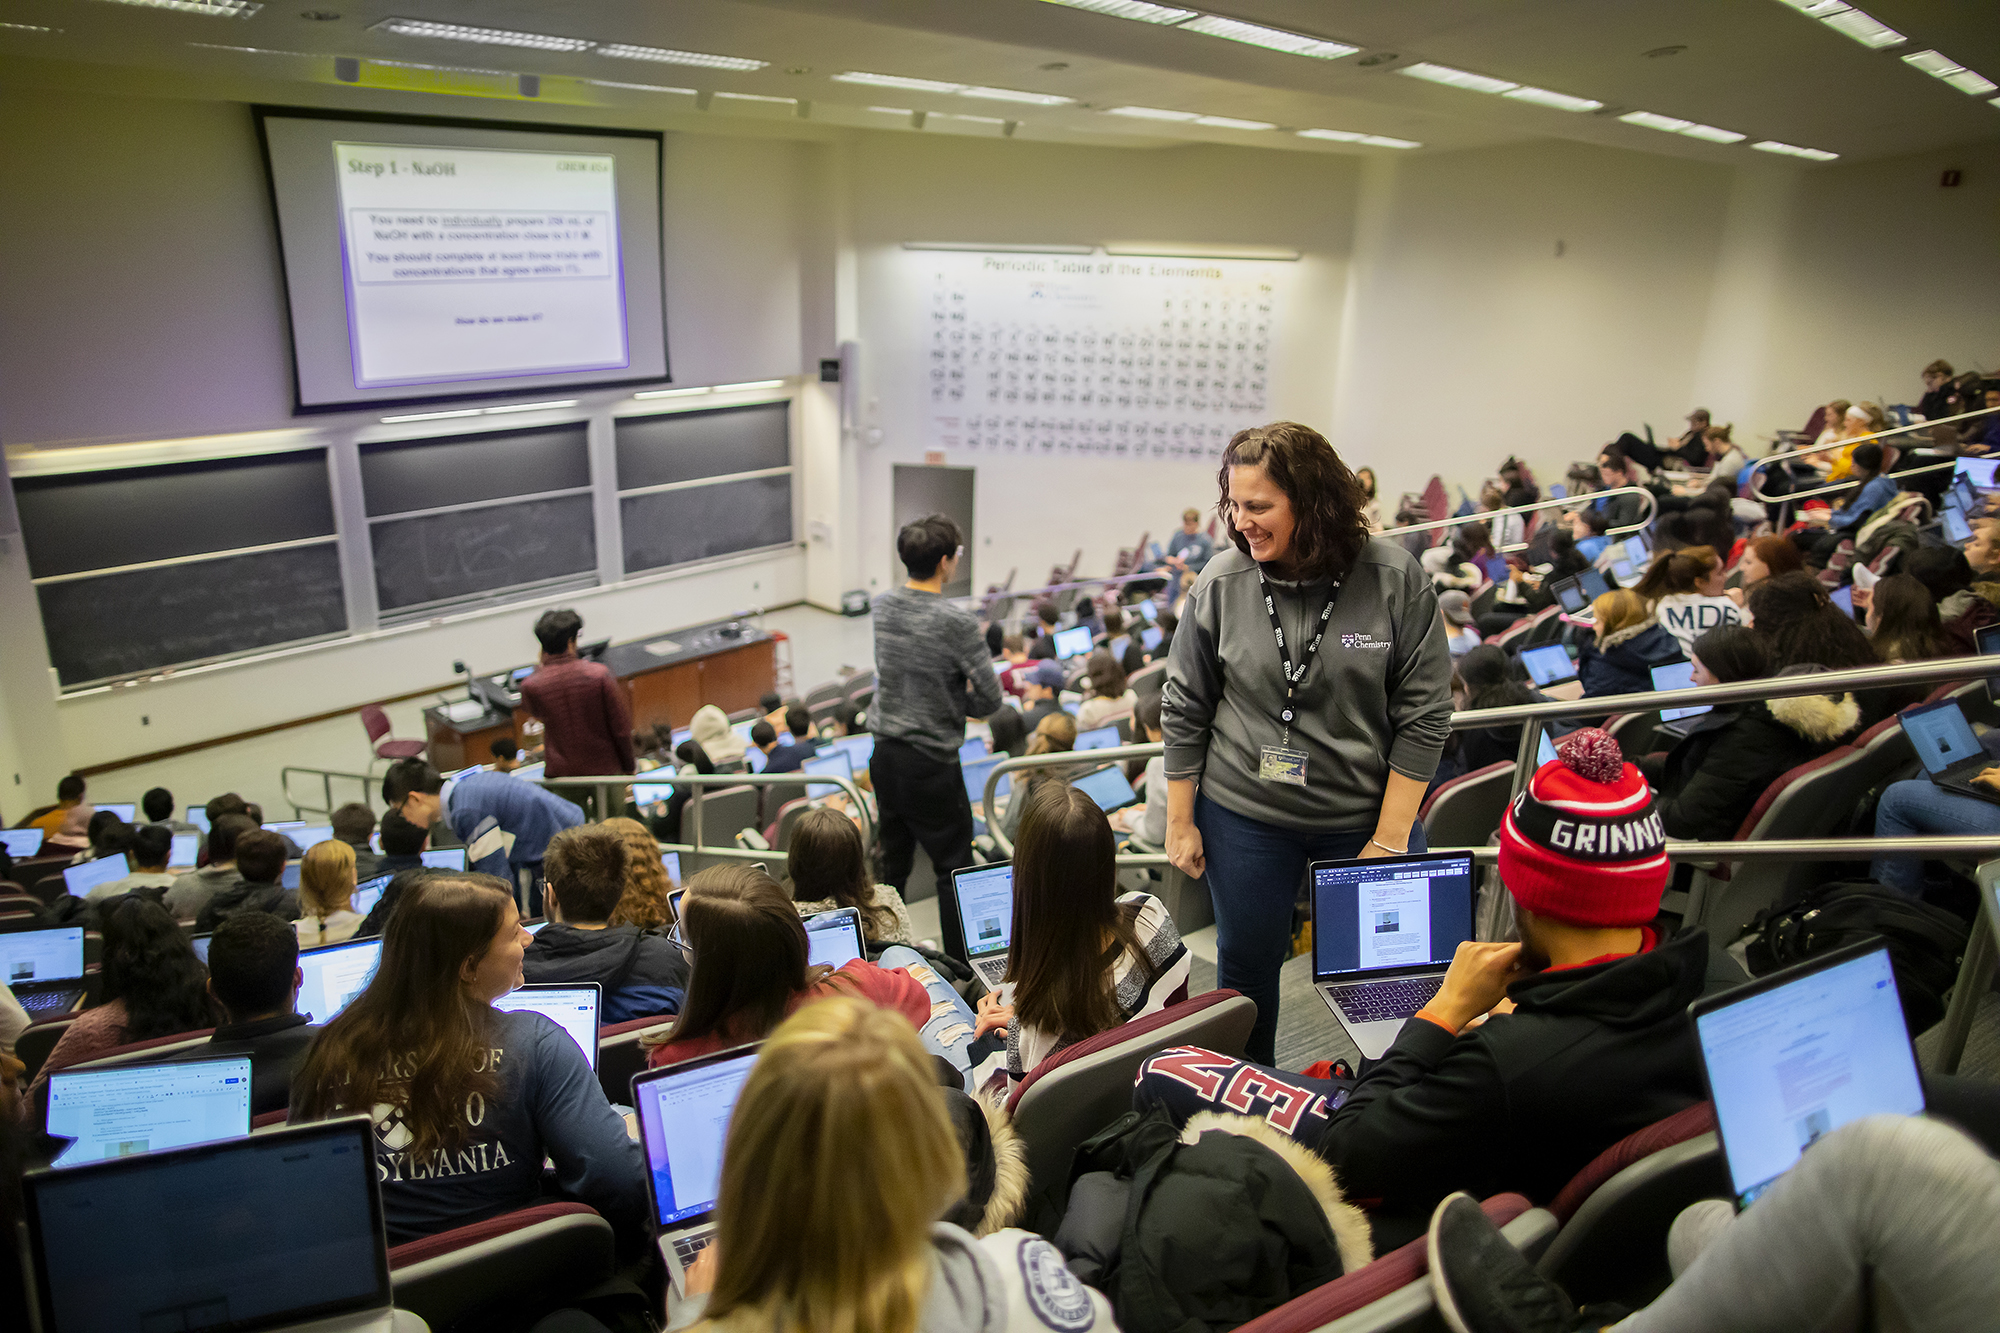 currano and two teaching assistants talk to students in a lecture hall while they work on their laptops